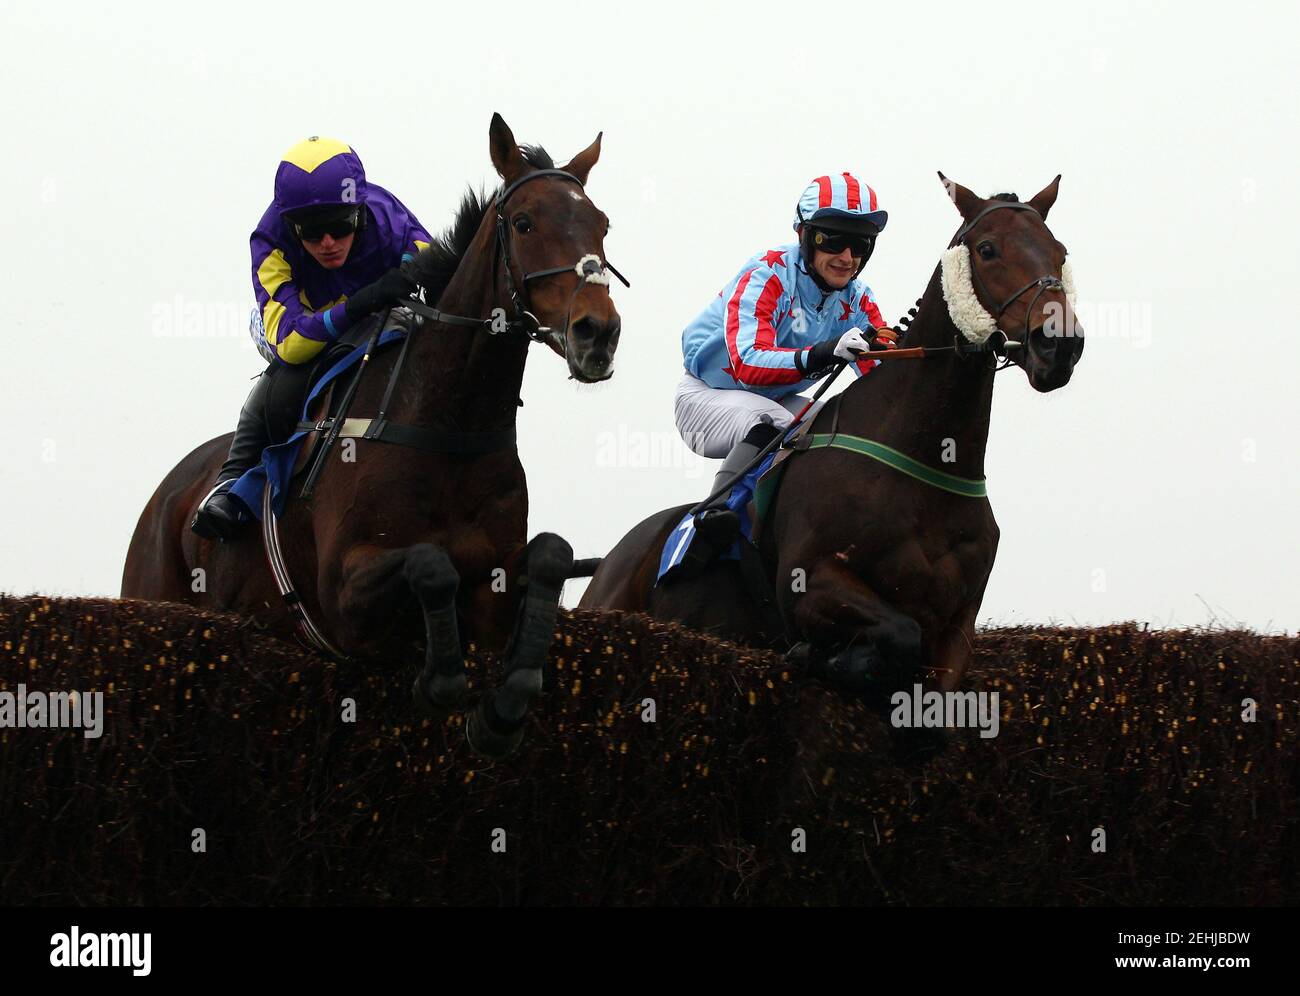 Horse Racing - Wincanton  - Wincanton Racecourse - 14/10/10  Outside Investor ridden by Keiran Burke (R) clears a fence with Keltic Lord ridden by Nick Schofield before going on to win the 15.50 The Higos Insurance Services Somerton Handicap Steeple Chase  Mandatory Credit: Action Images / Julian Herbert  Livepic Stock Photo